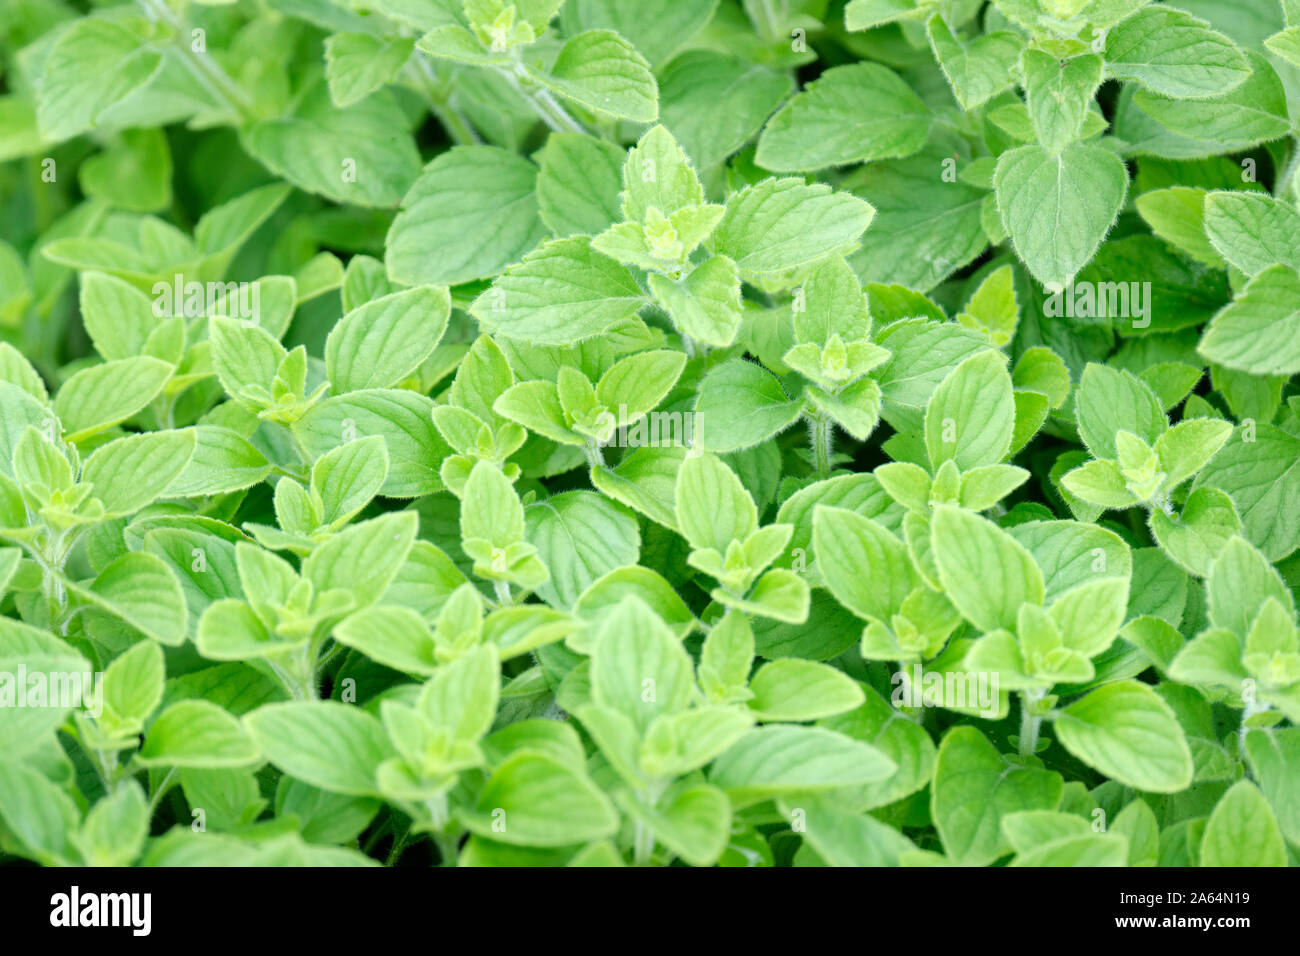 Calamintha nepeta, Lesser Calamint leaves/foliage, herb of the mint family Stock Photo